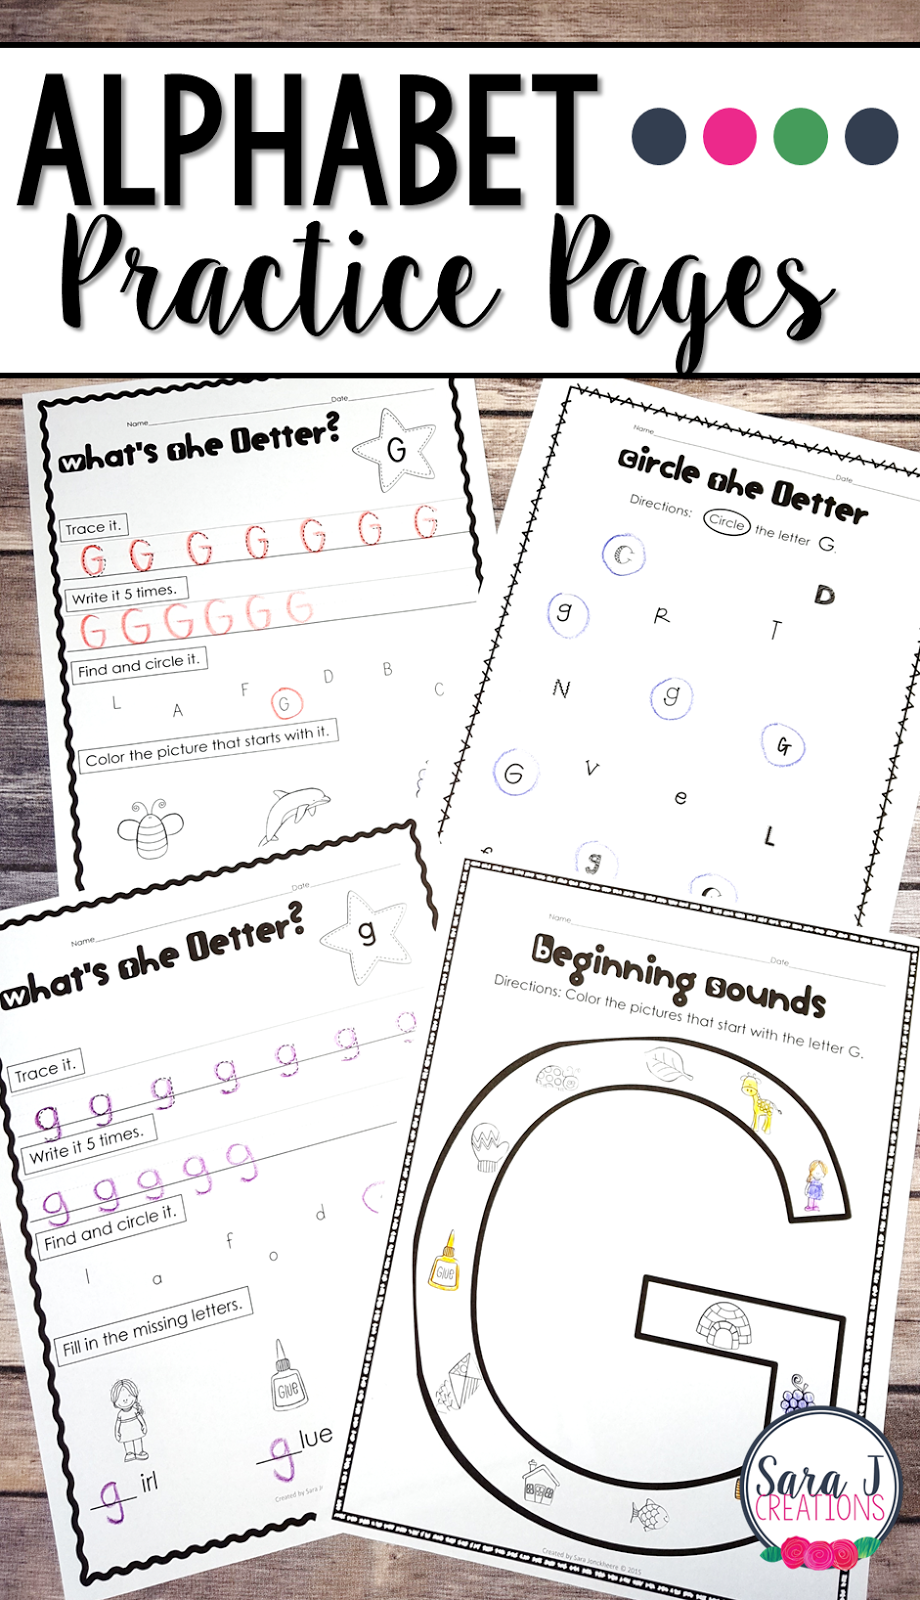 ABC printable pages make a quick and easy way to practice the alphabet. 4 different versions to make practicing upper and lowercase letter more fun!